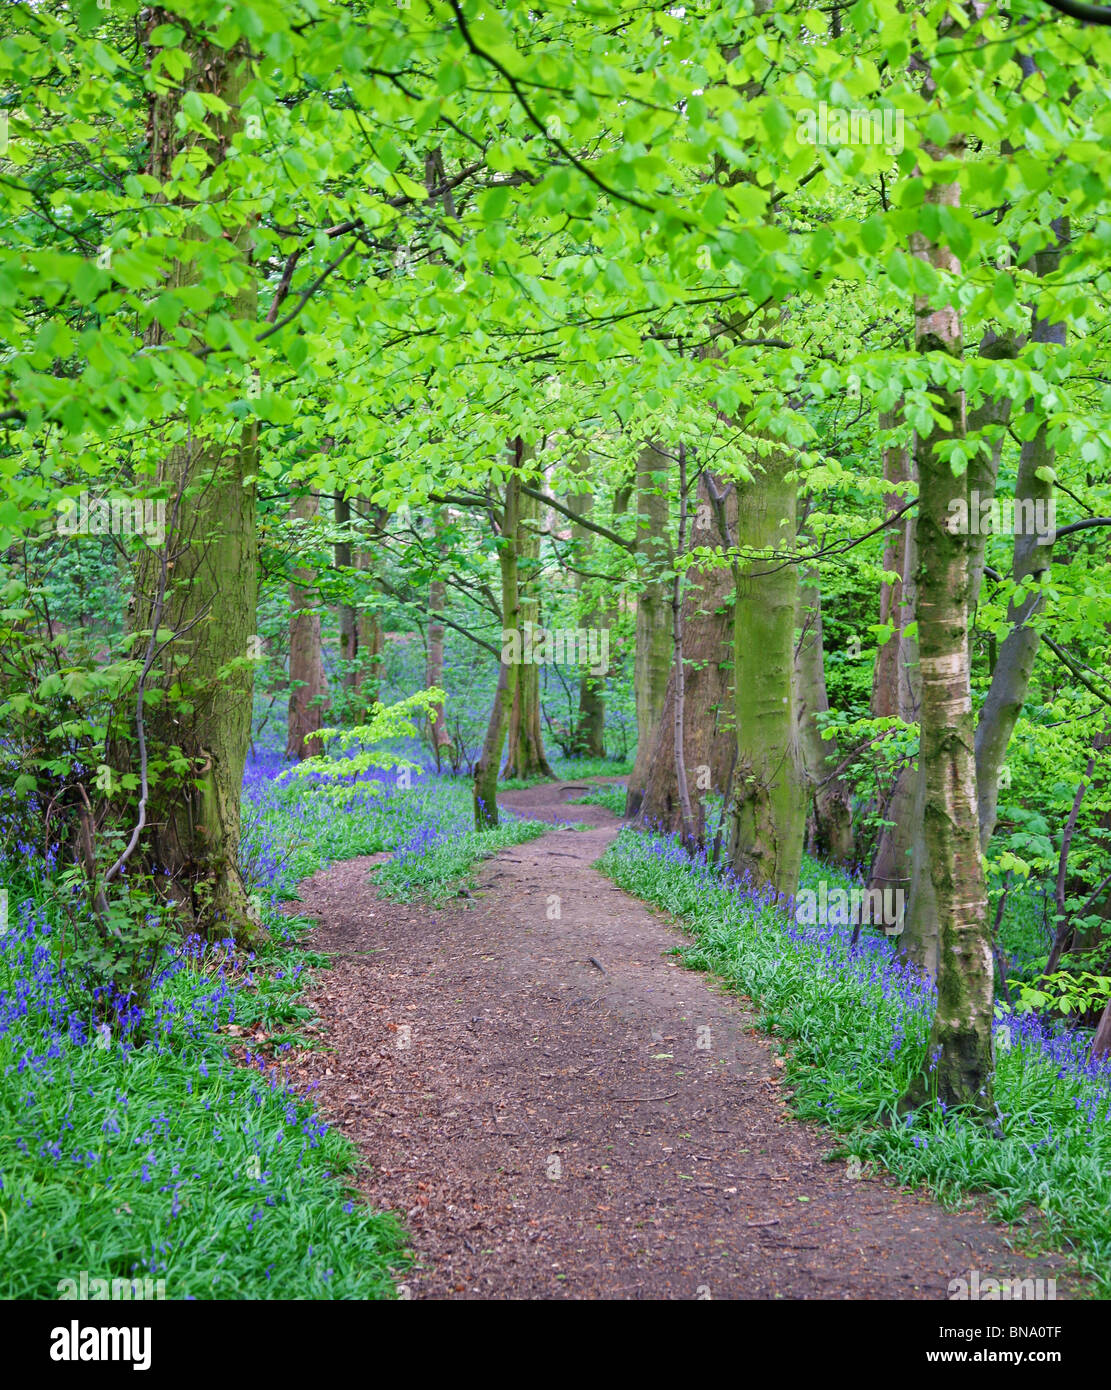 Common Bluebells (Hyacinthoides non-scripta) in an English wood Stock Photo